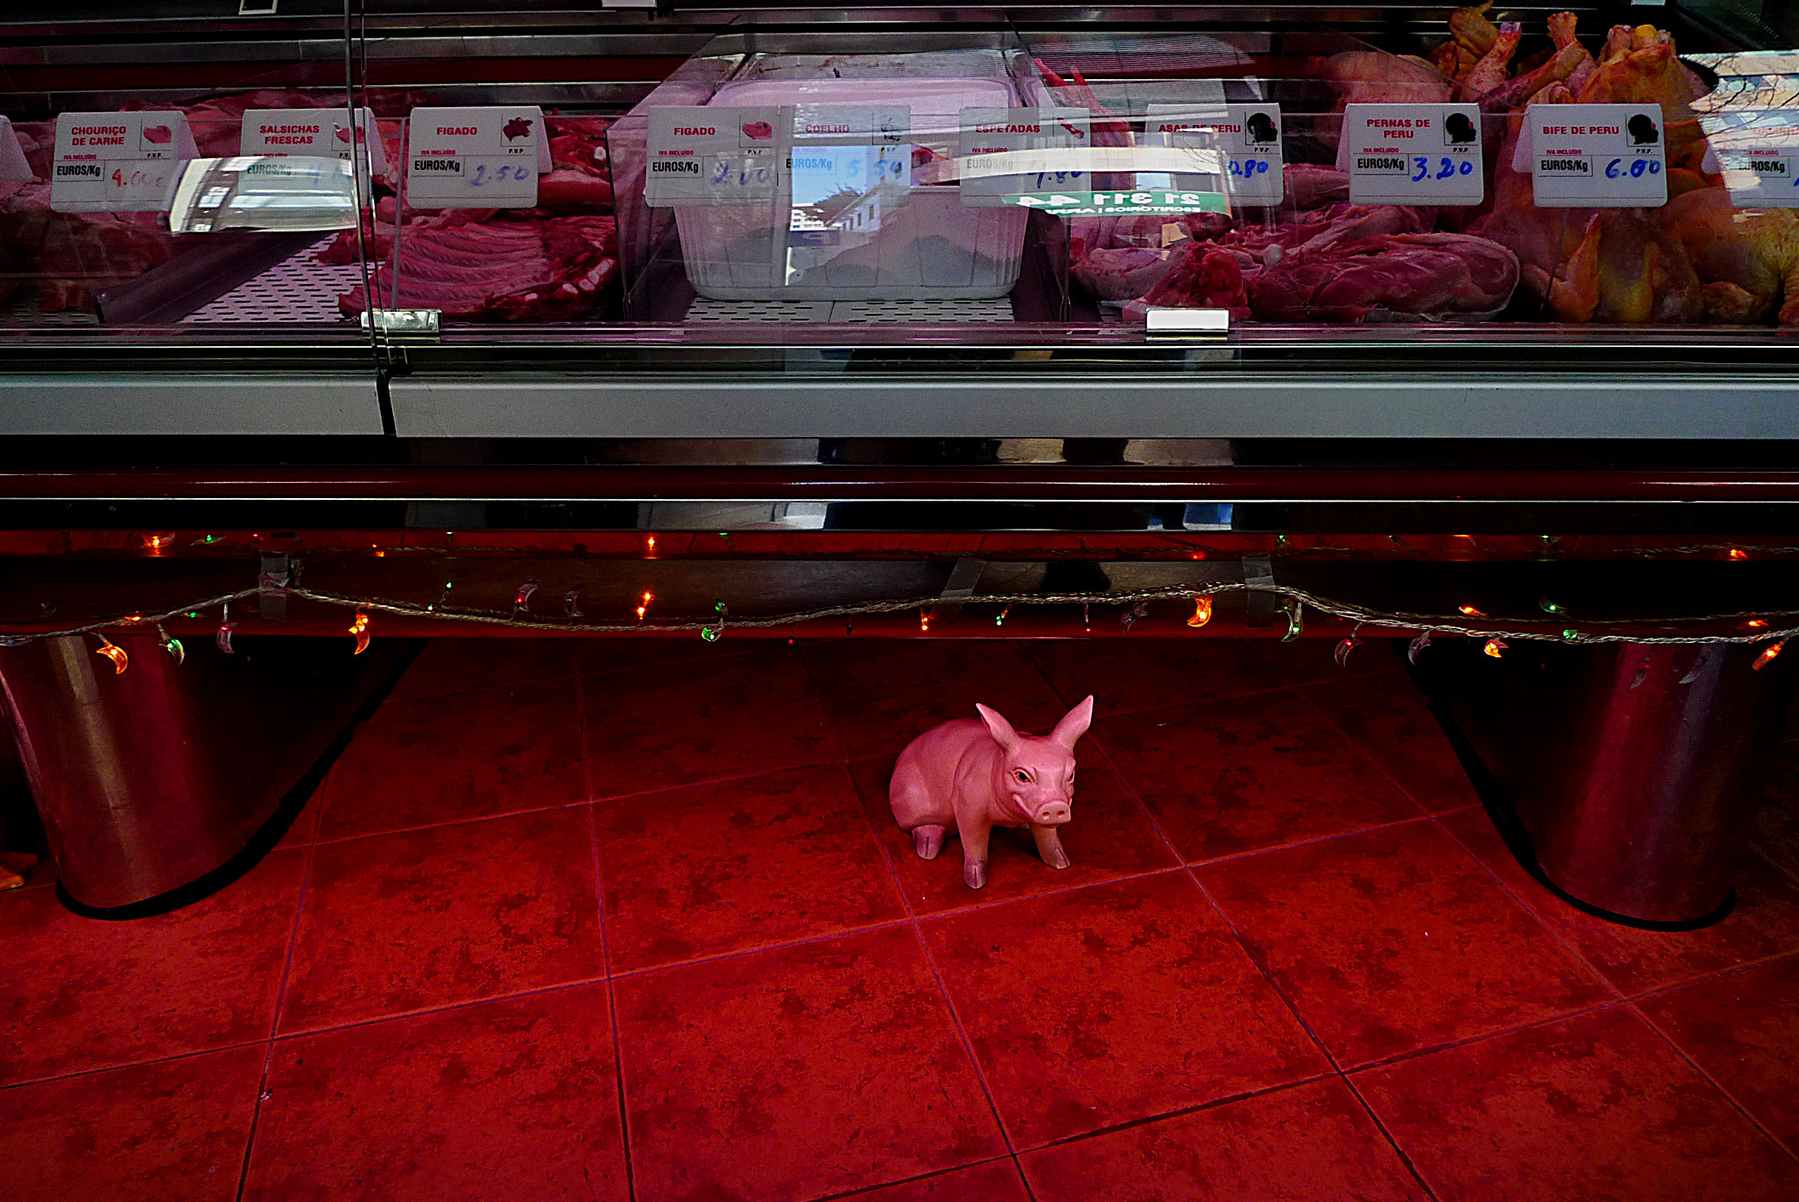 A ceramic pig on a red butcher floor.